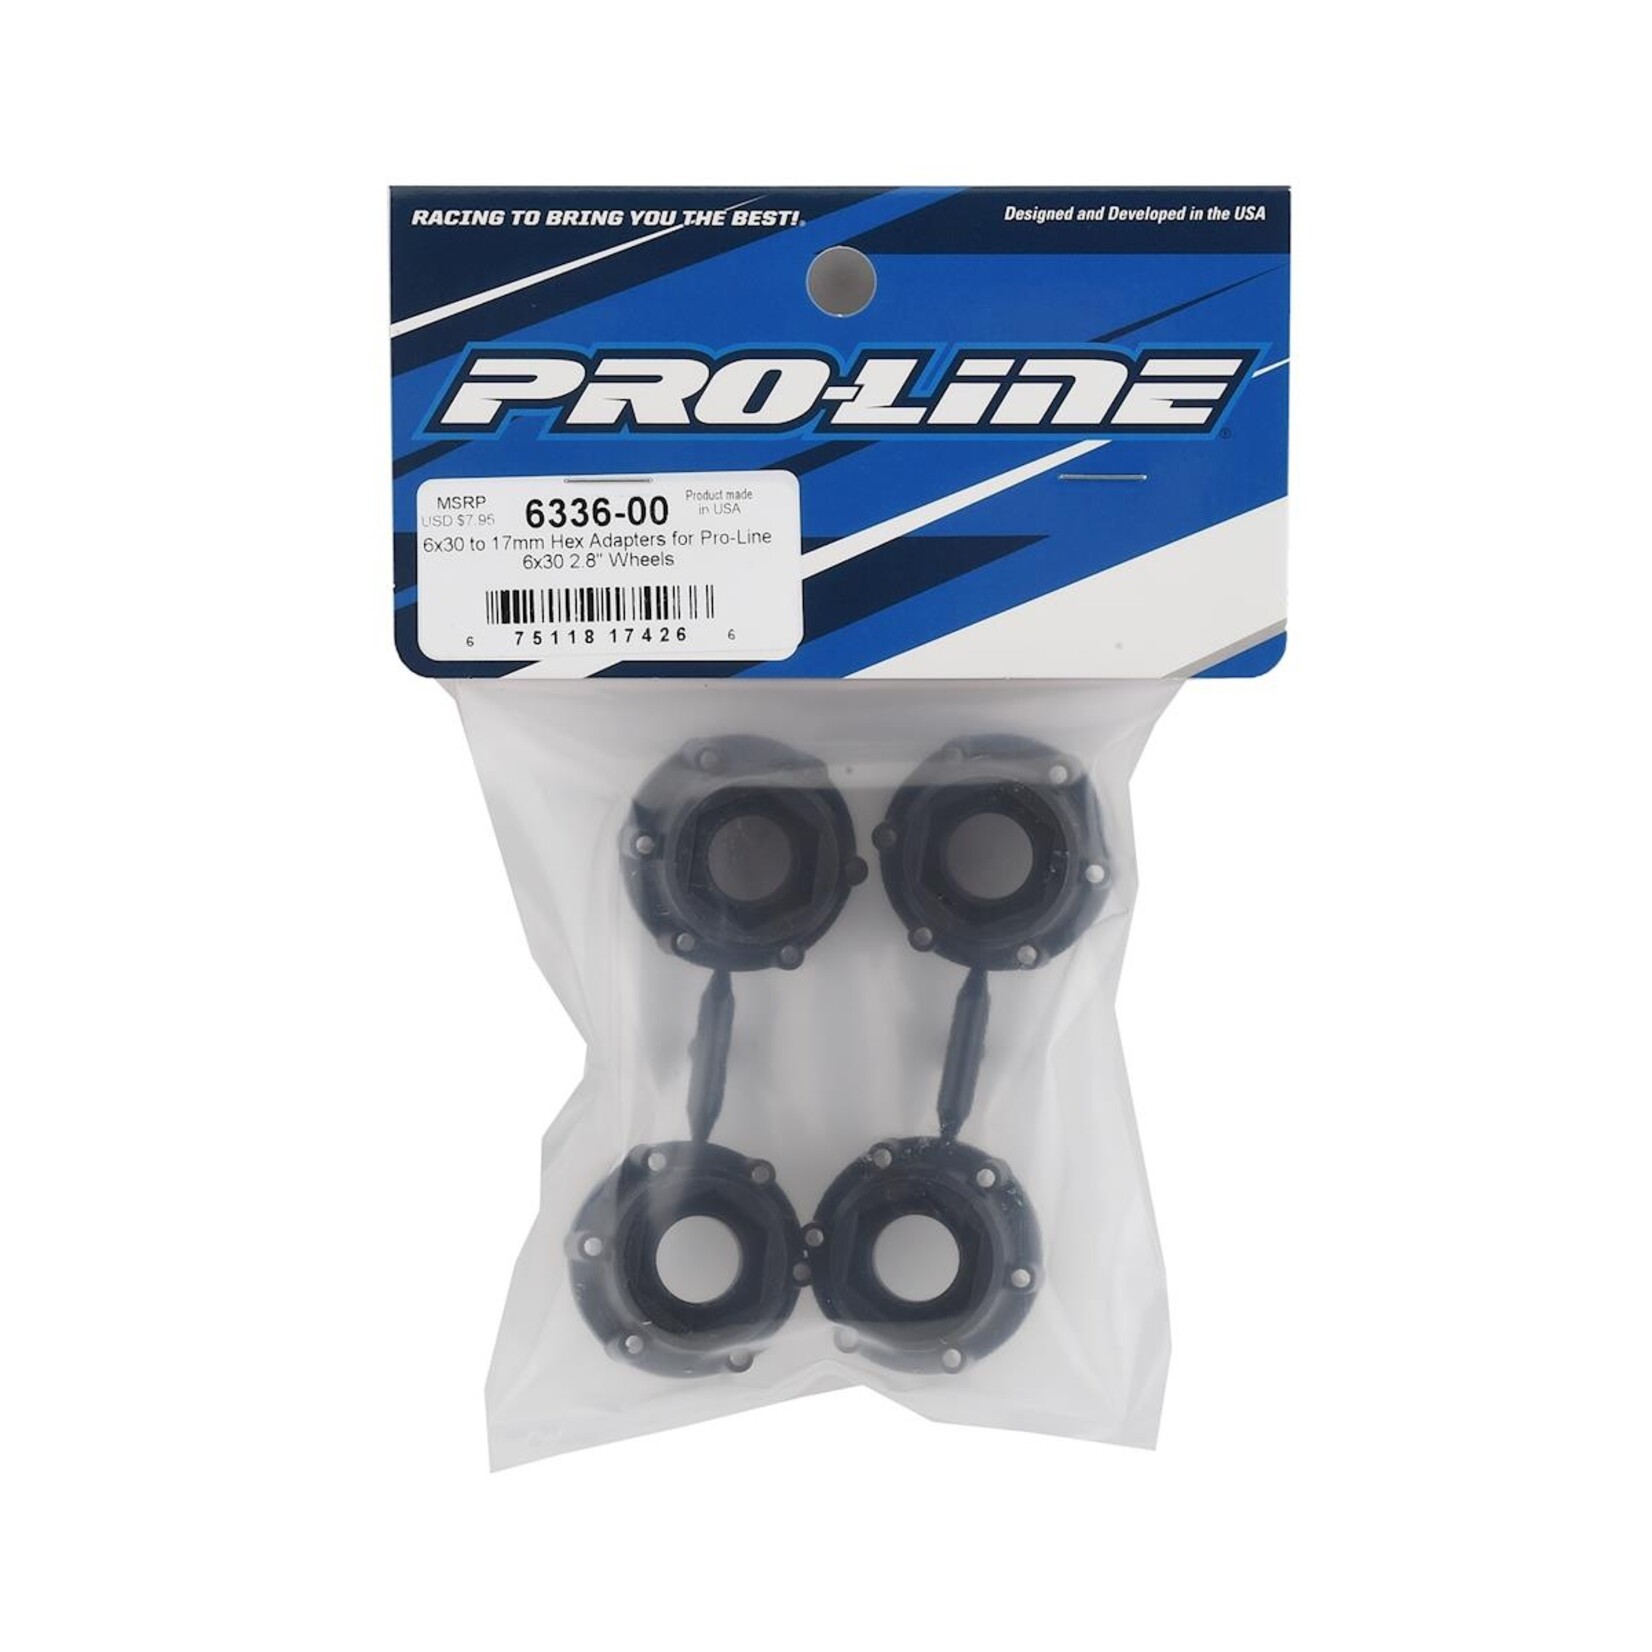 Pro-Line ProLine 6x30 to 14mm Hex Adapters (2) #6347-00